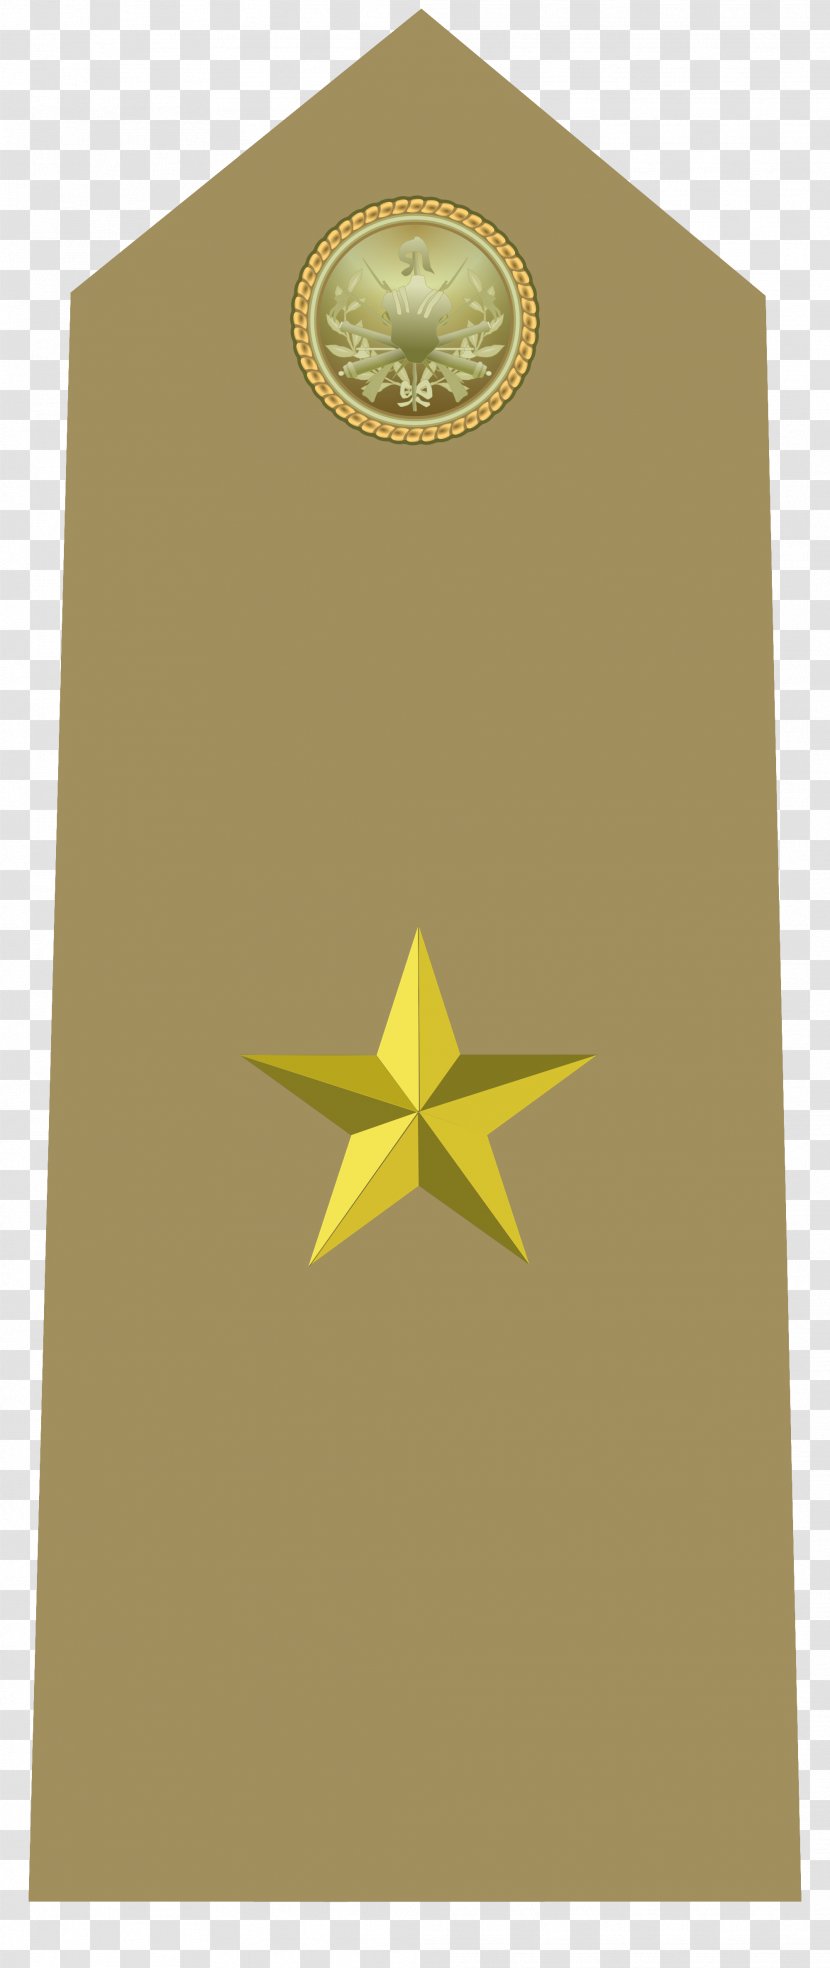 Army Military Navy Wiki - Wikipedia Transparent PNG